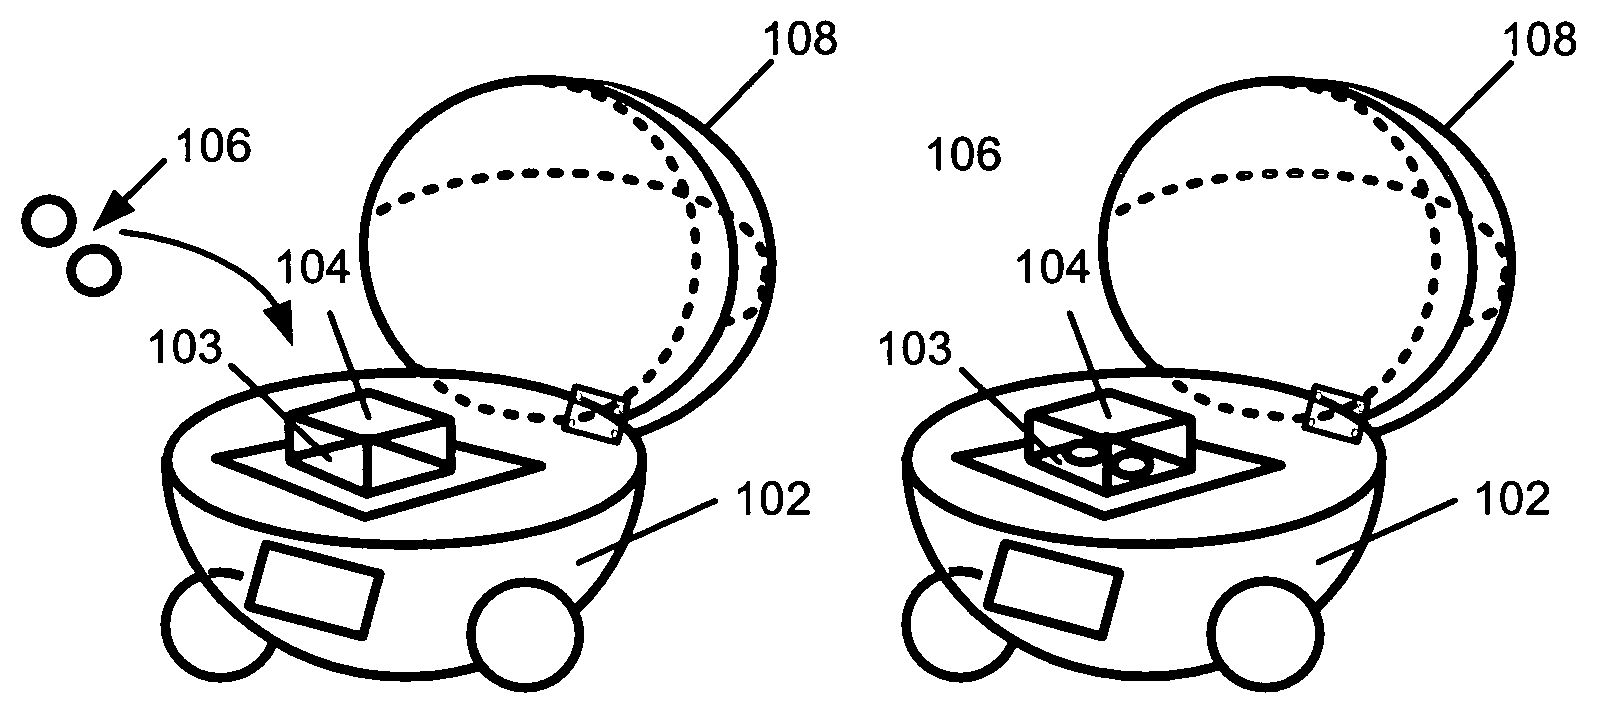 Systems and methods for measuring tear film osmolarity